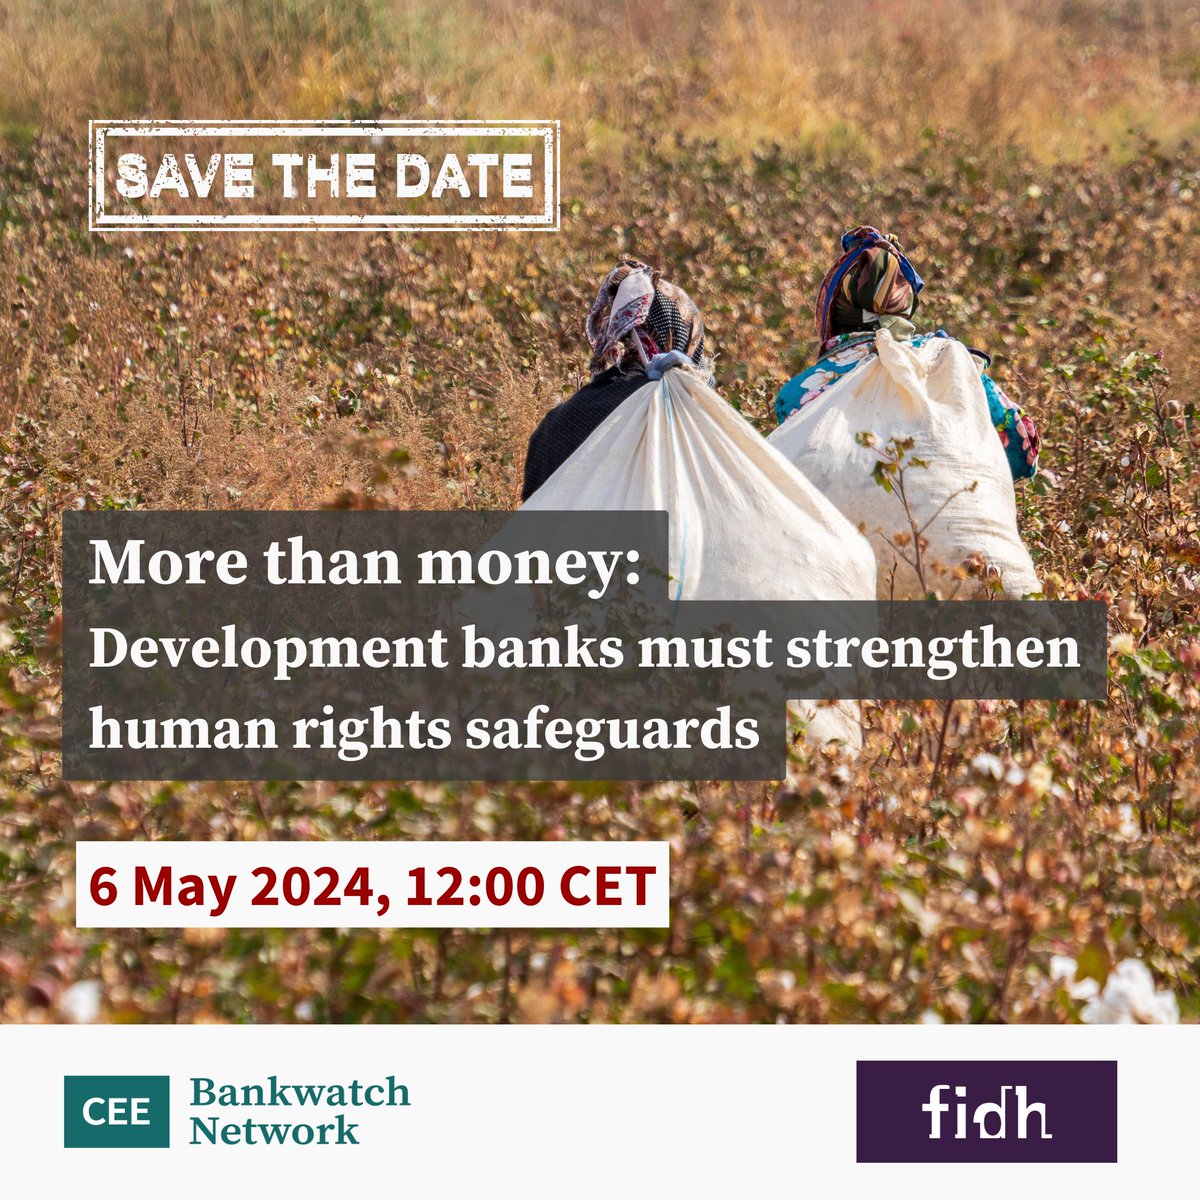 SAVE THE DATE The @EIB, @EBRD, @AFD_France & @IFC_org are among the world's leading public development banks. Their policies commit to respecting human rights. But all too often they end up violating human rights instead. What needs to change? ✍️Register: us02web.zoom.us/meeting/regist…